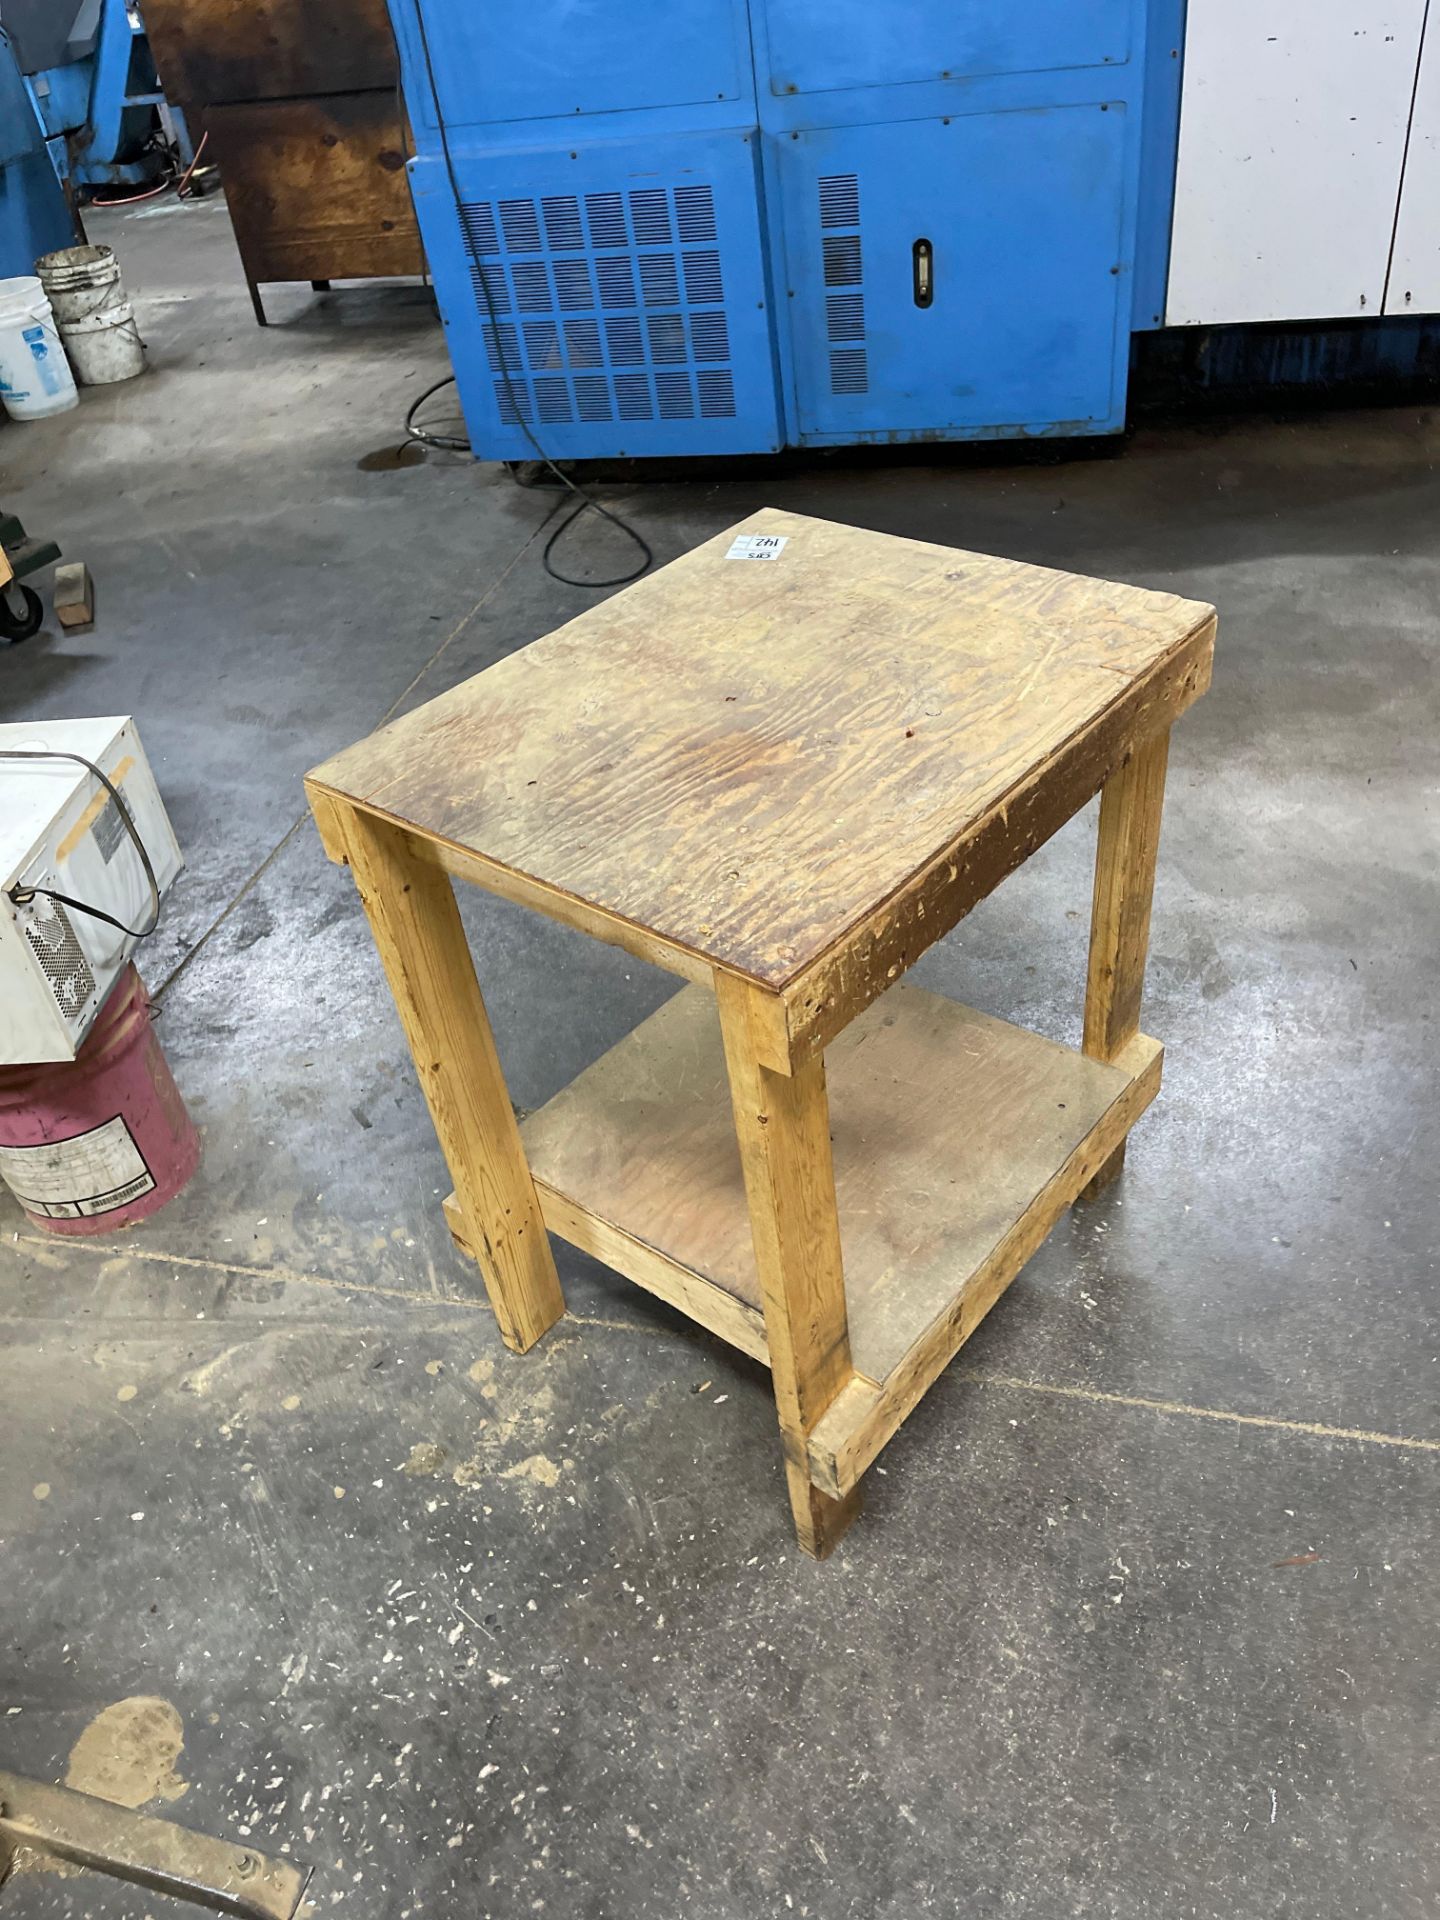 2-Tier Wood Work Bench w/ 2-step Stool - Image 2 of 4